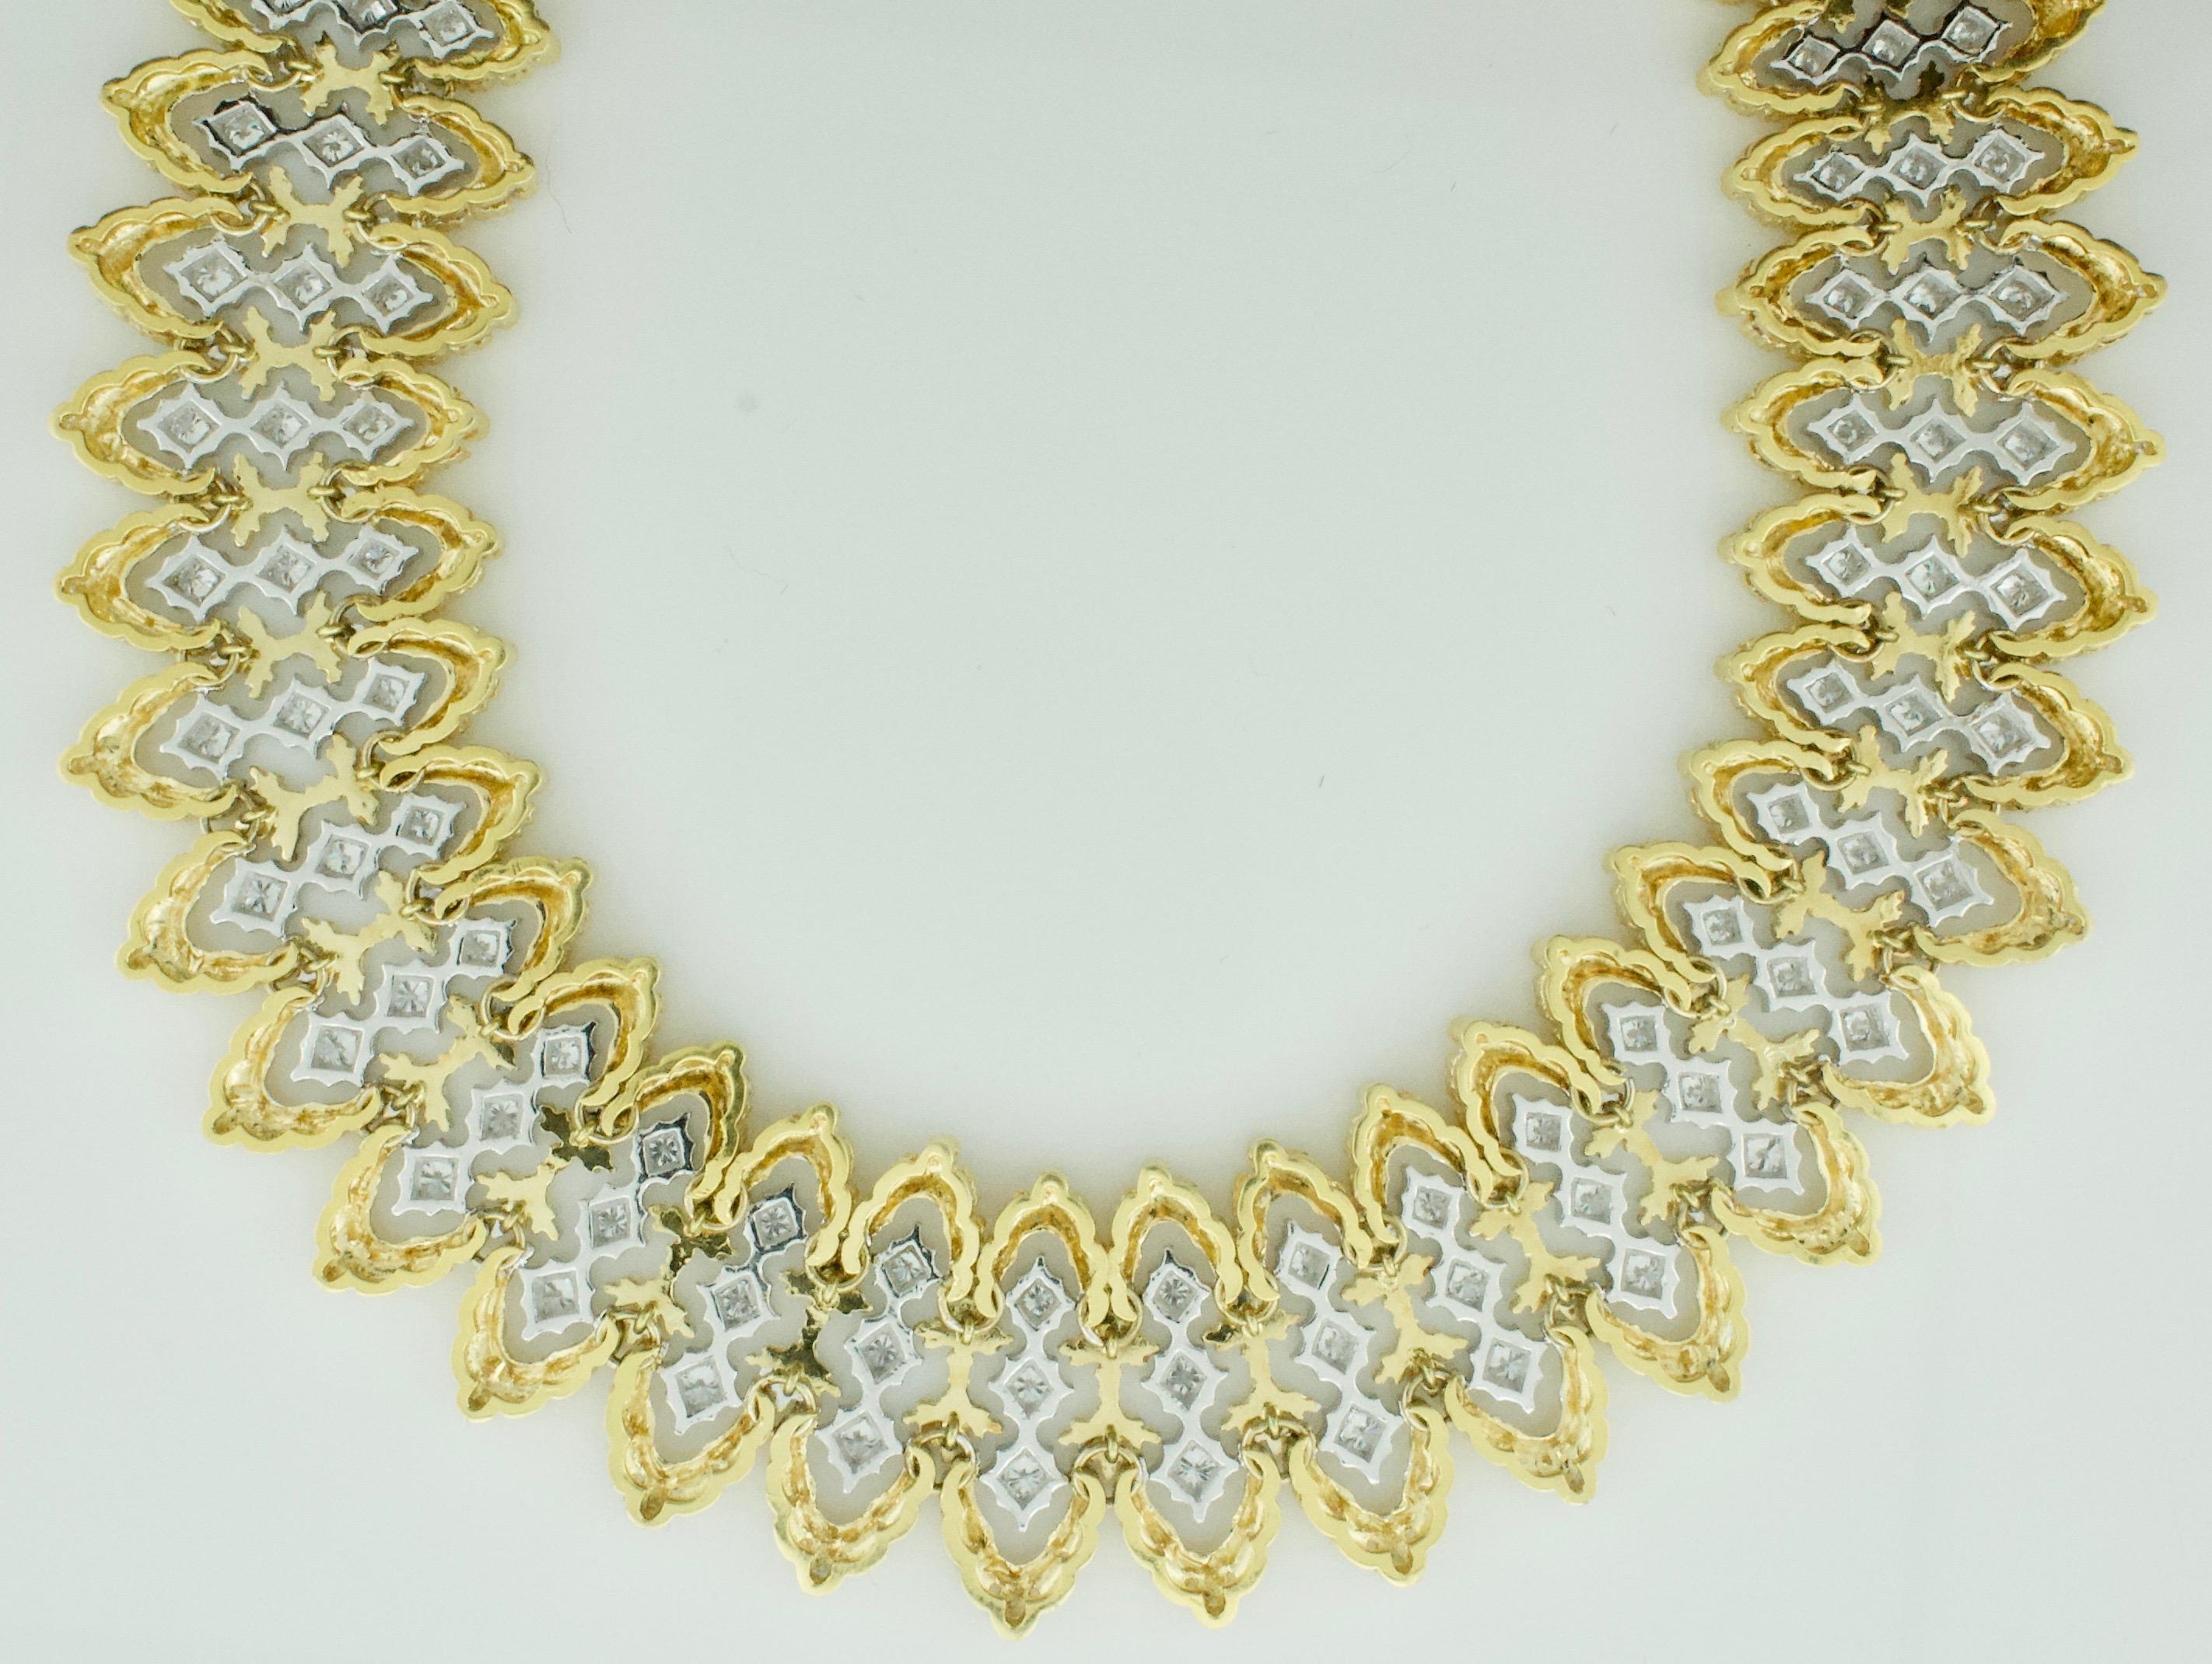 Round Cut Impressive Heavy Diamond  Necklace in 18k Yellow Gold [5 Ounces+] 7.00 carats  For Sale